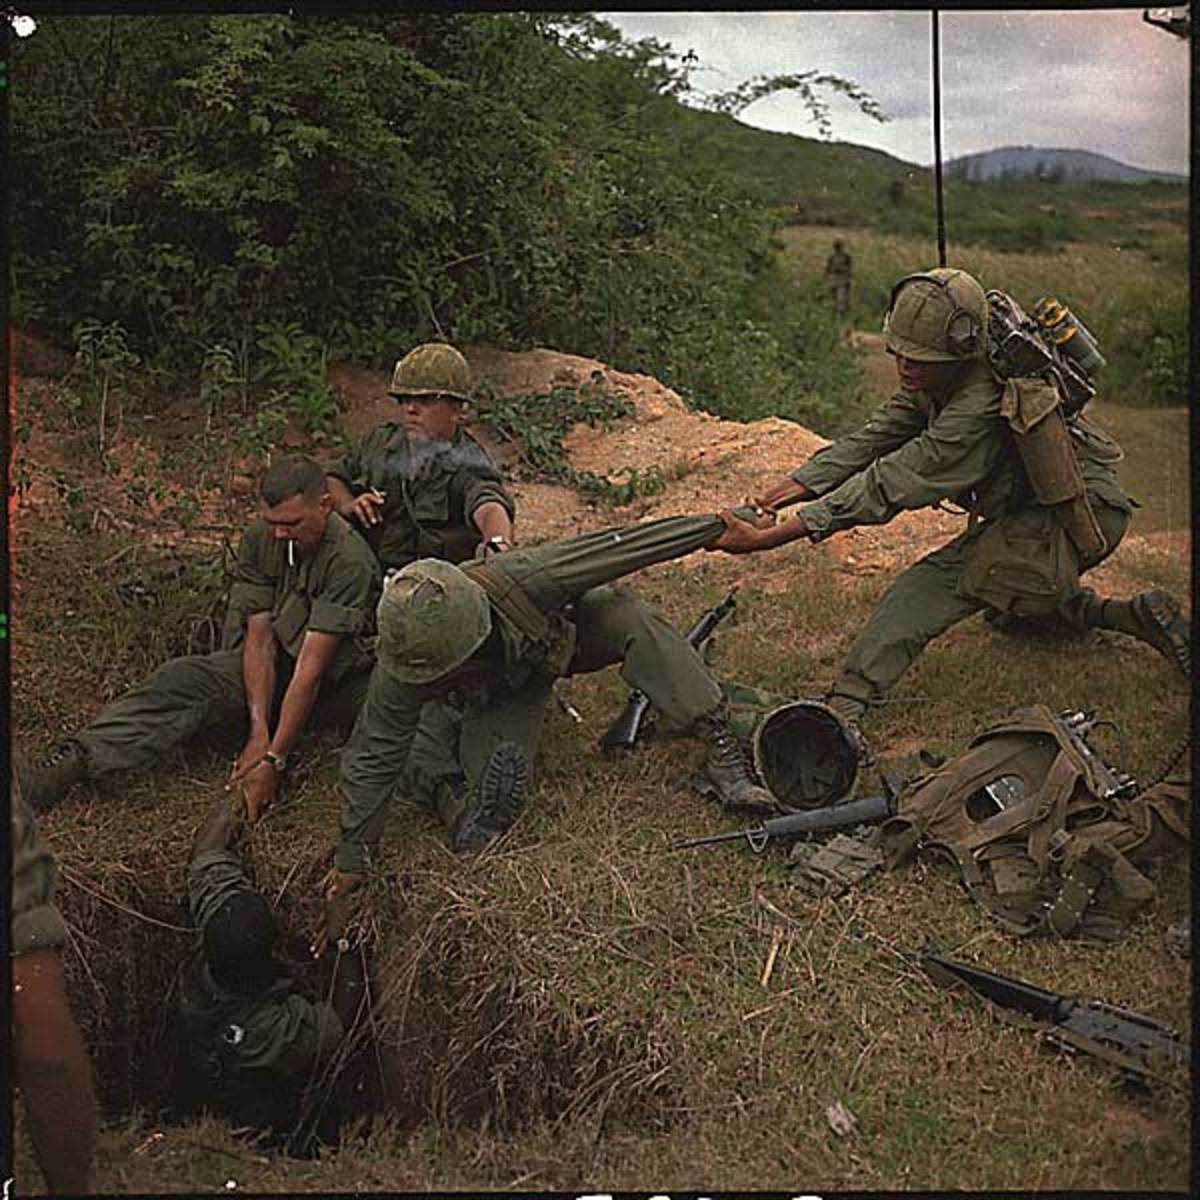 Operation "Oregon," a search and destroy mission conducted by an infantry platoon of Troop B, 1st Reconnaissance Squadron, 9th Cavalry, 1st Cavalry Division (Airmobile), three kilometers west of Duc Pho, Quang Ngai Province.  